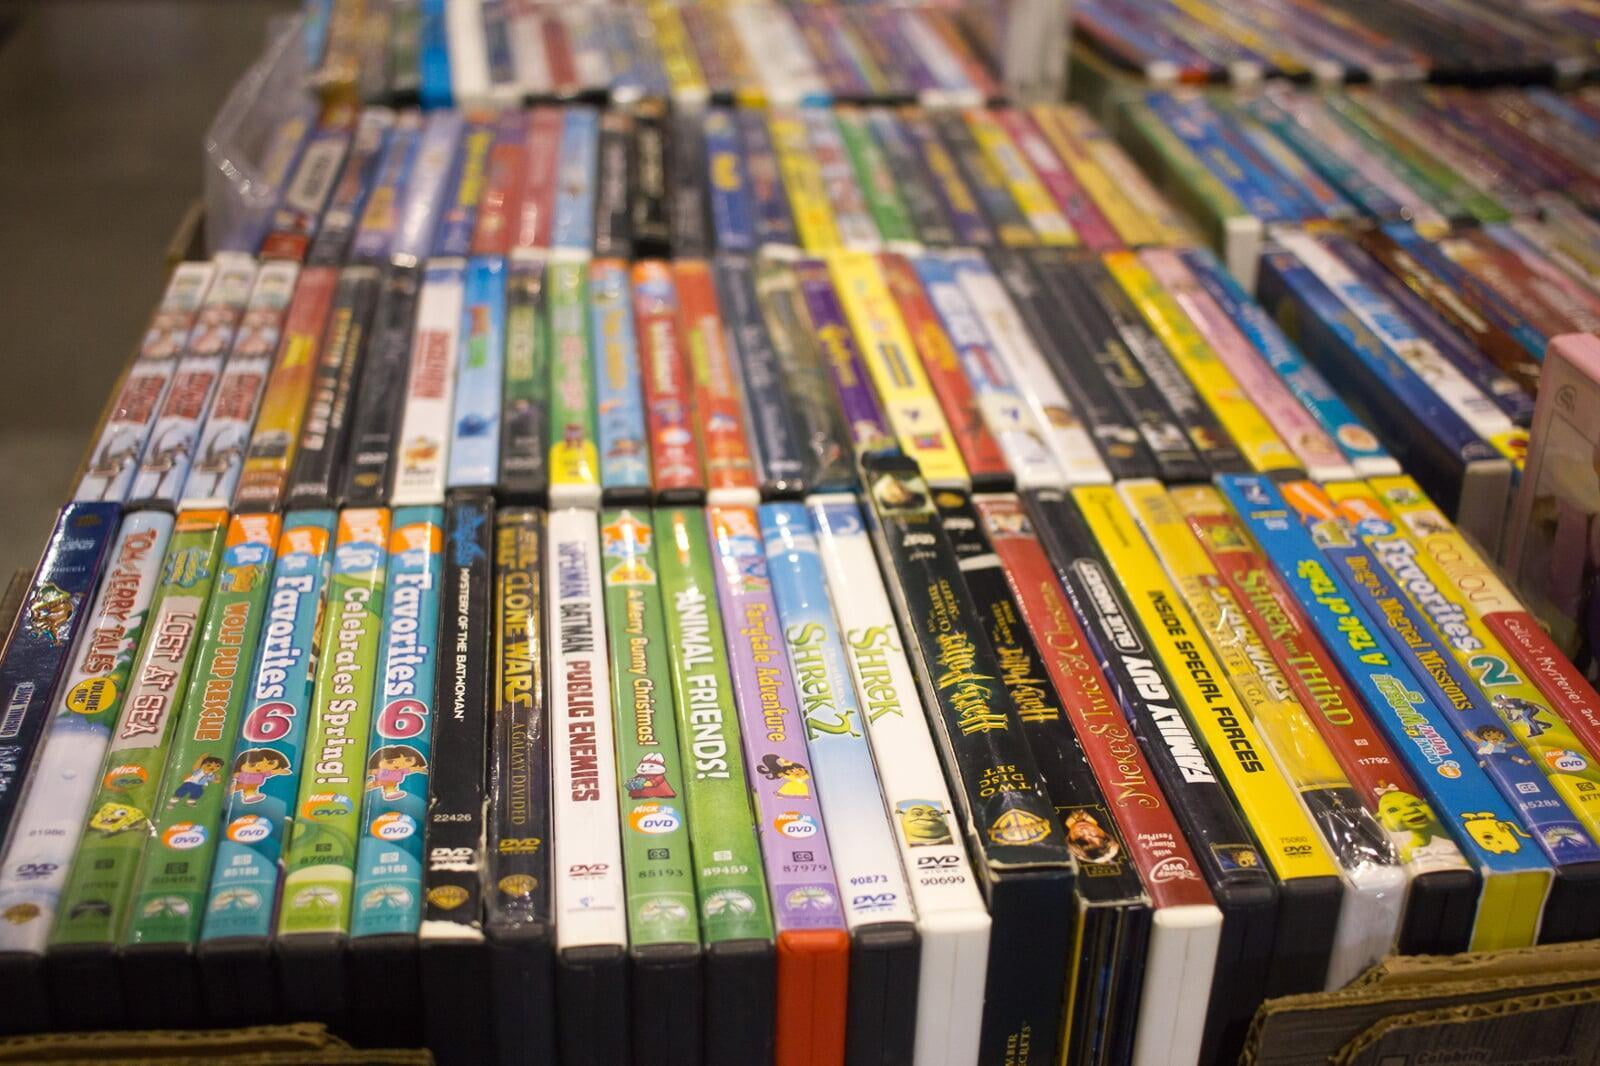 DVDs displayed on a table